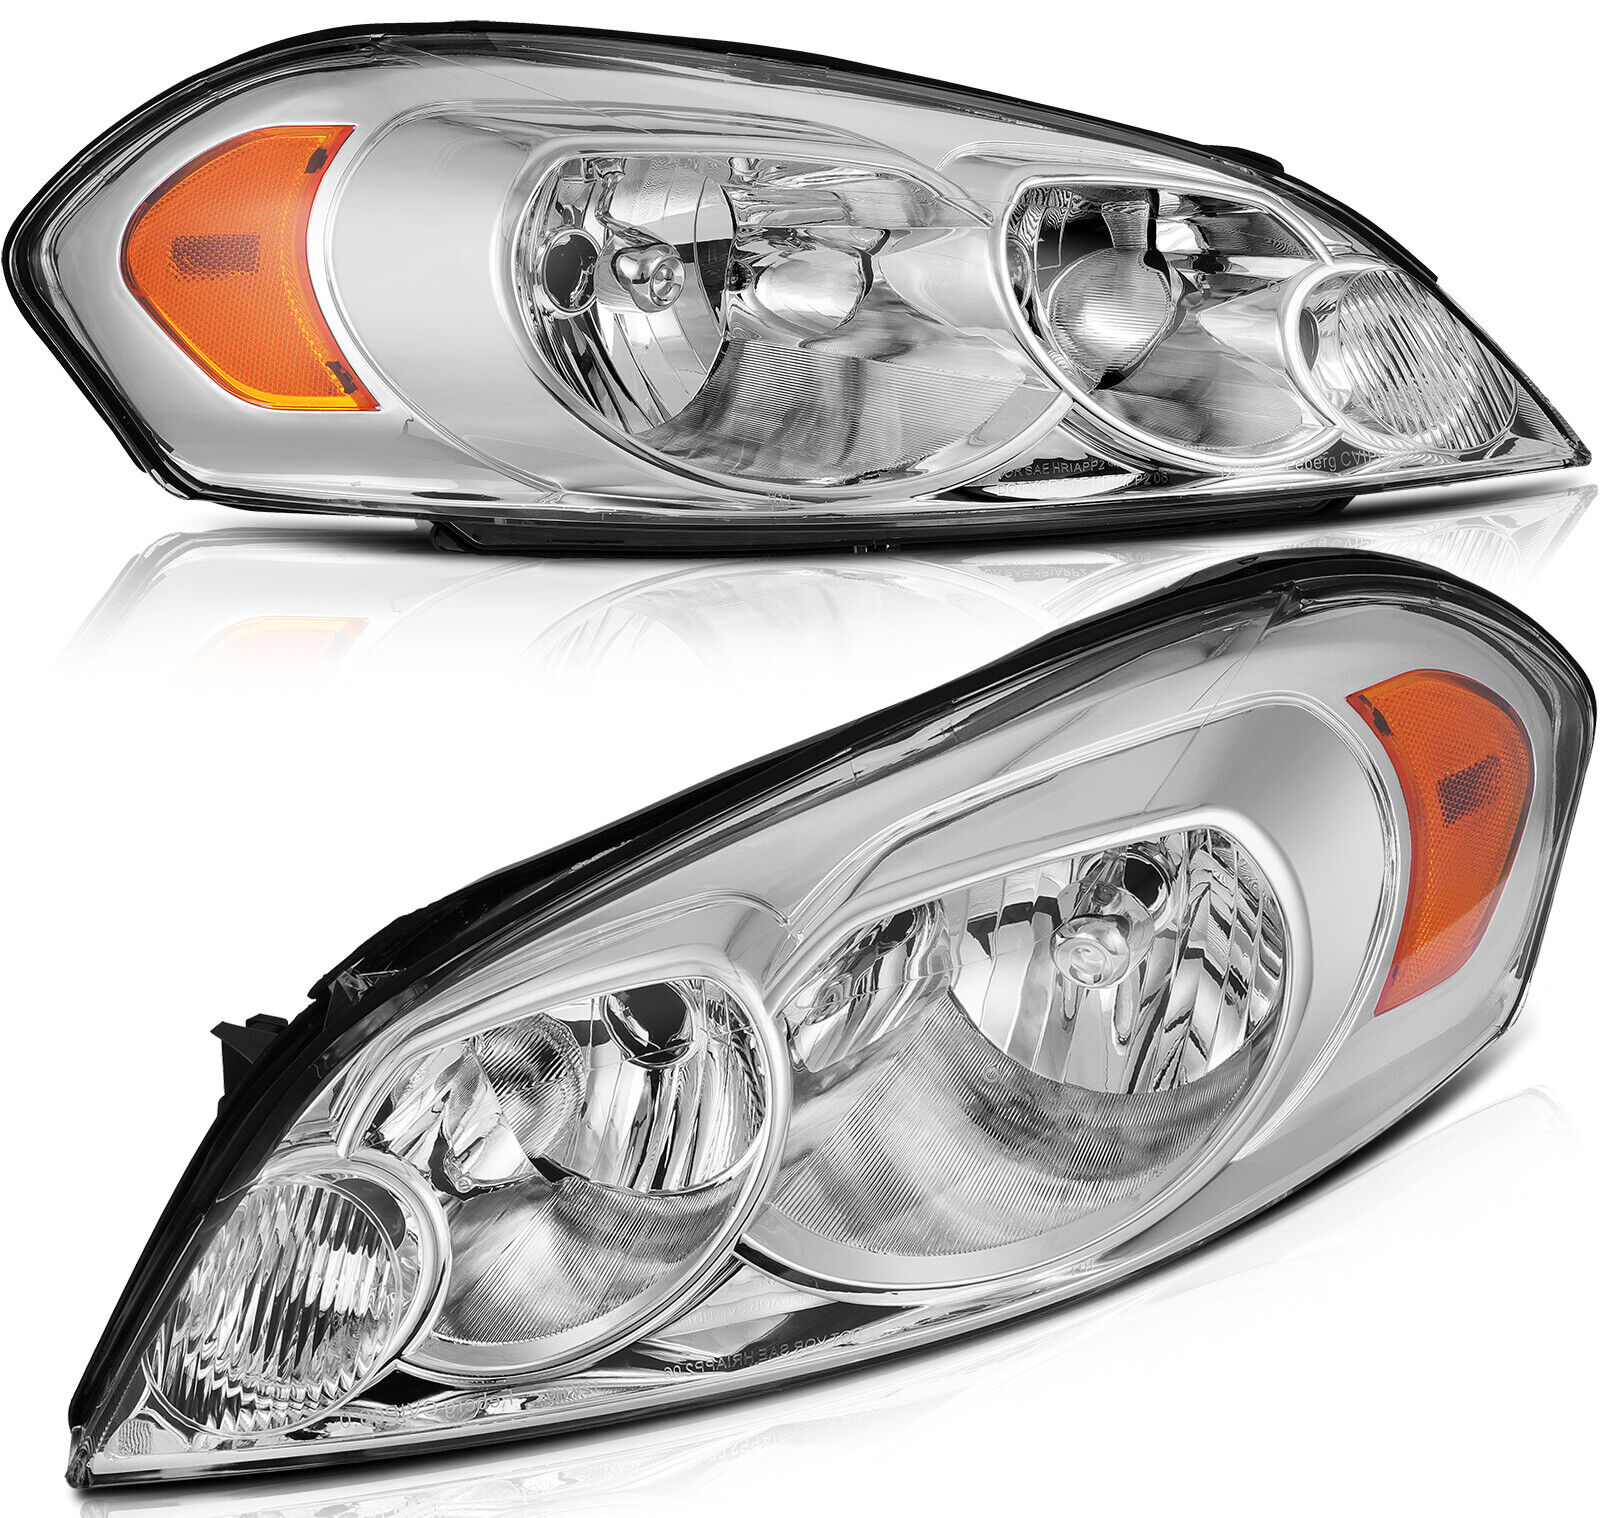 Headlights Assembly For 2006-2013 Chevy Chevrolet Impala Pair Chrome Headlamps